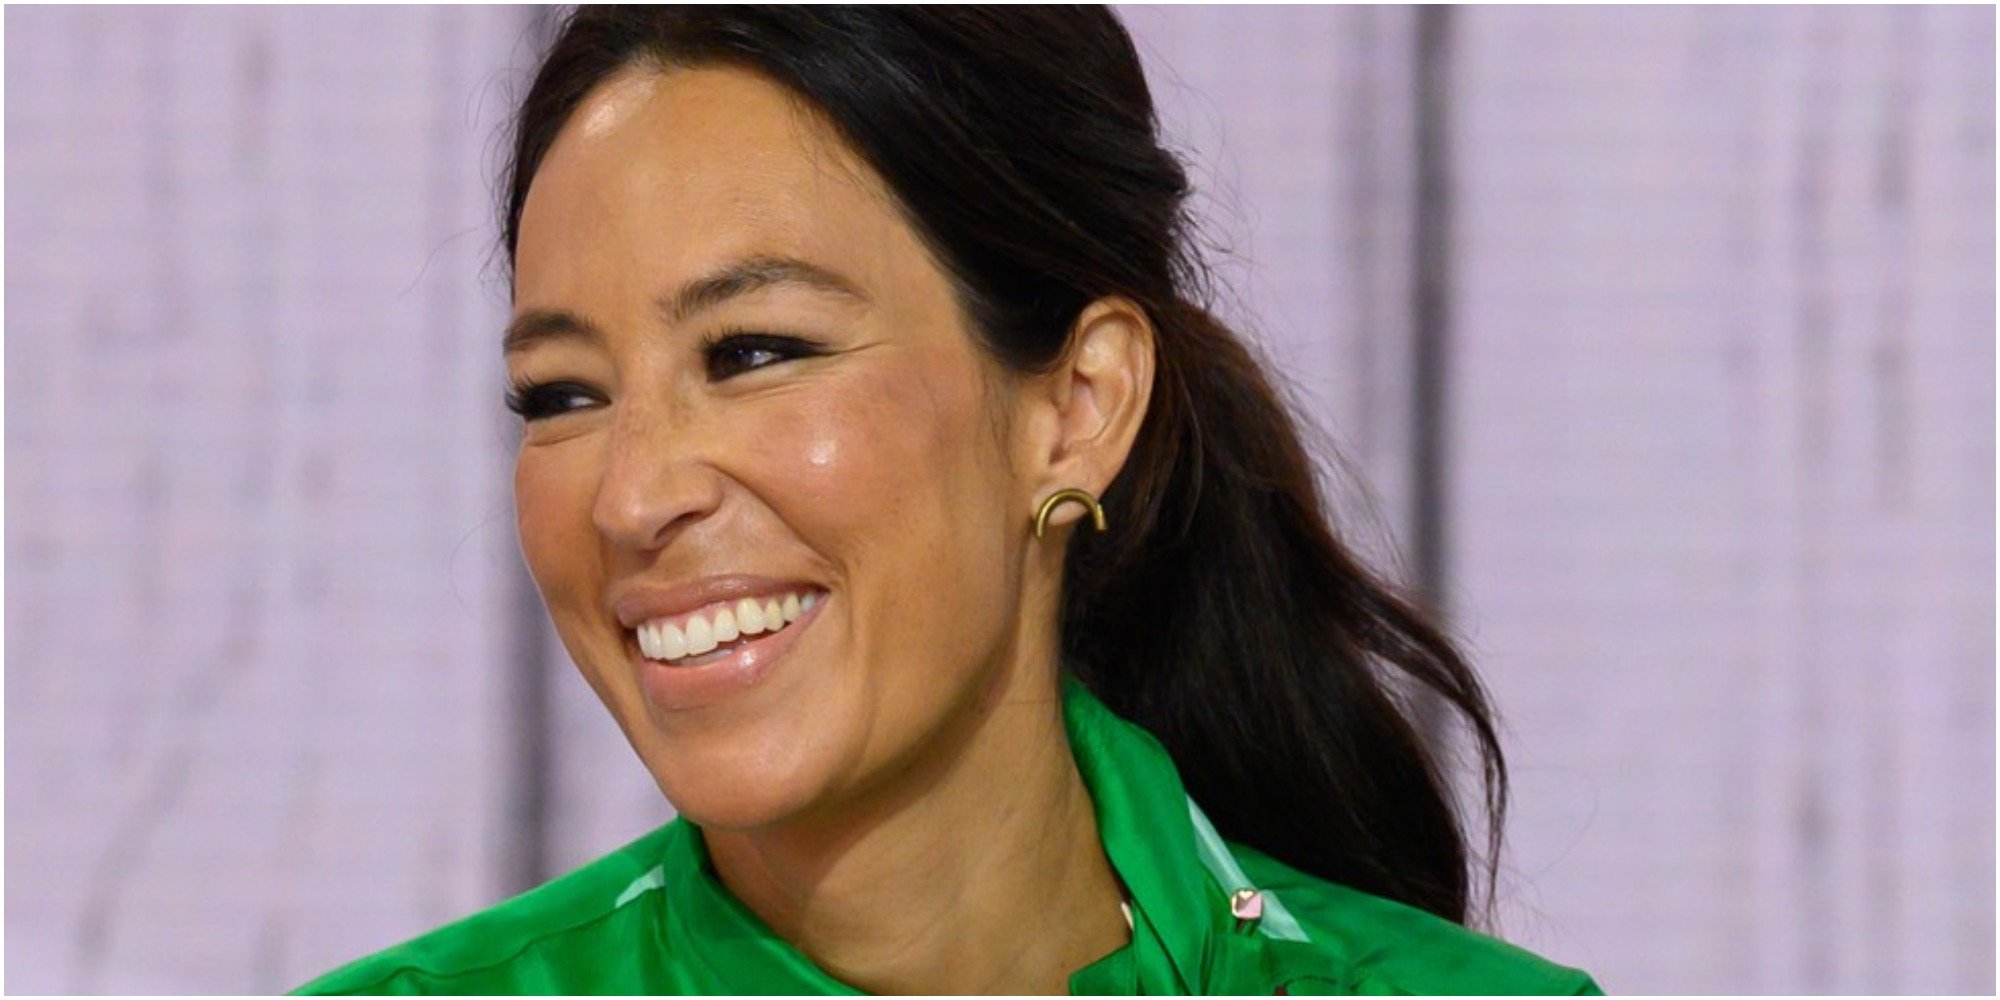 Joanna Gaines smiles for the camera wearing a green outfit.